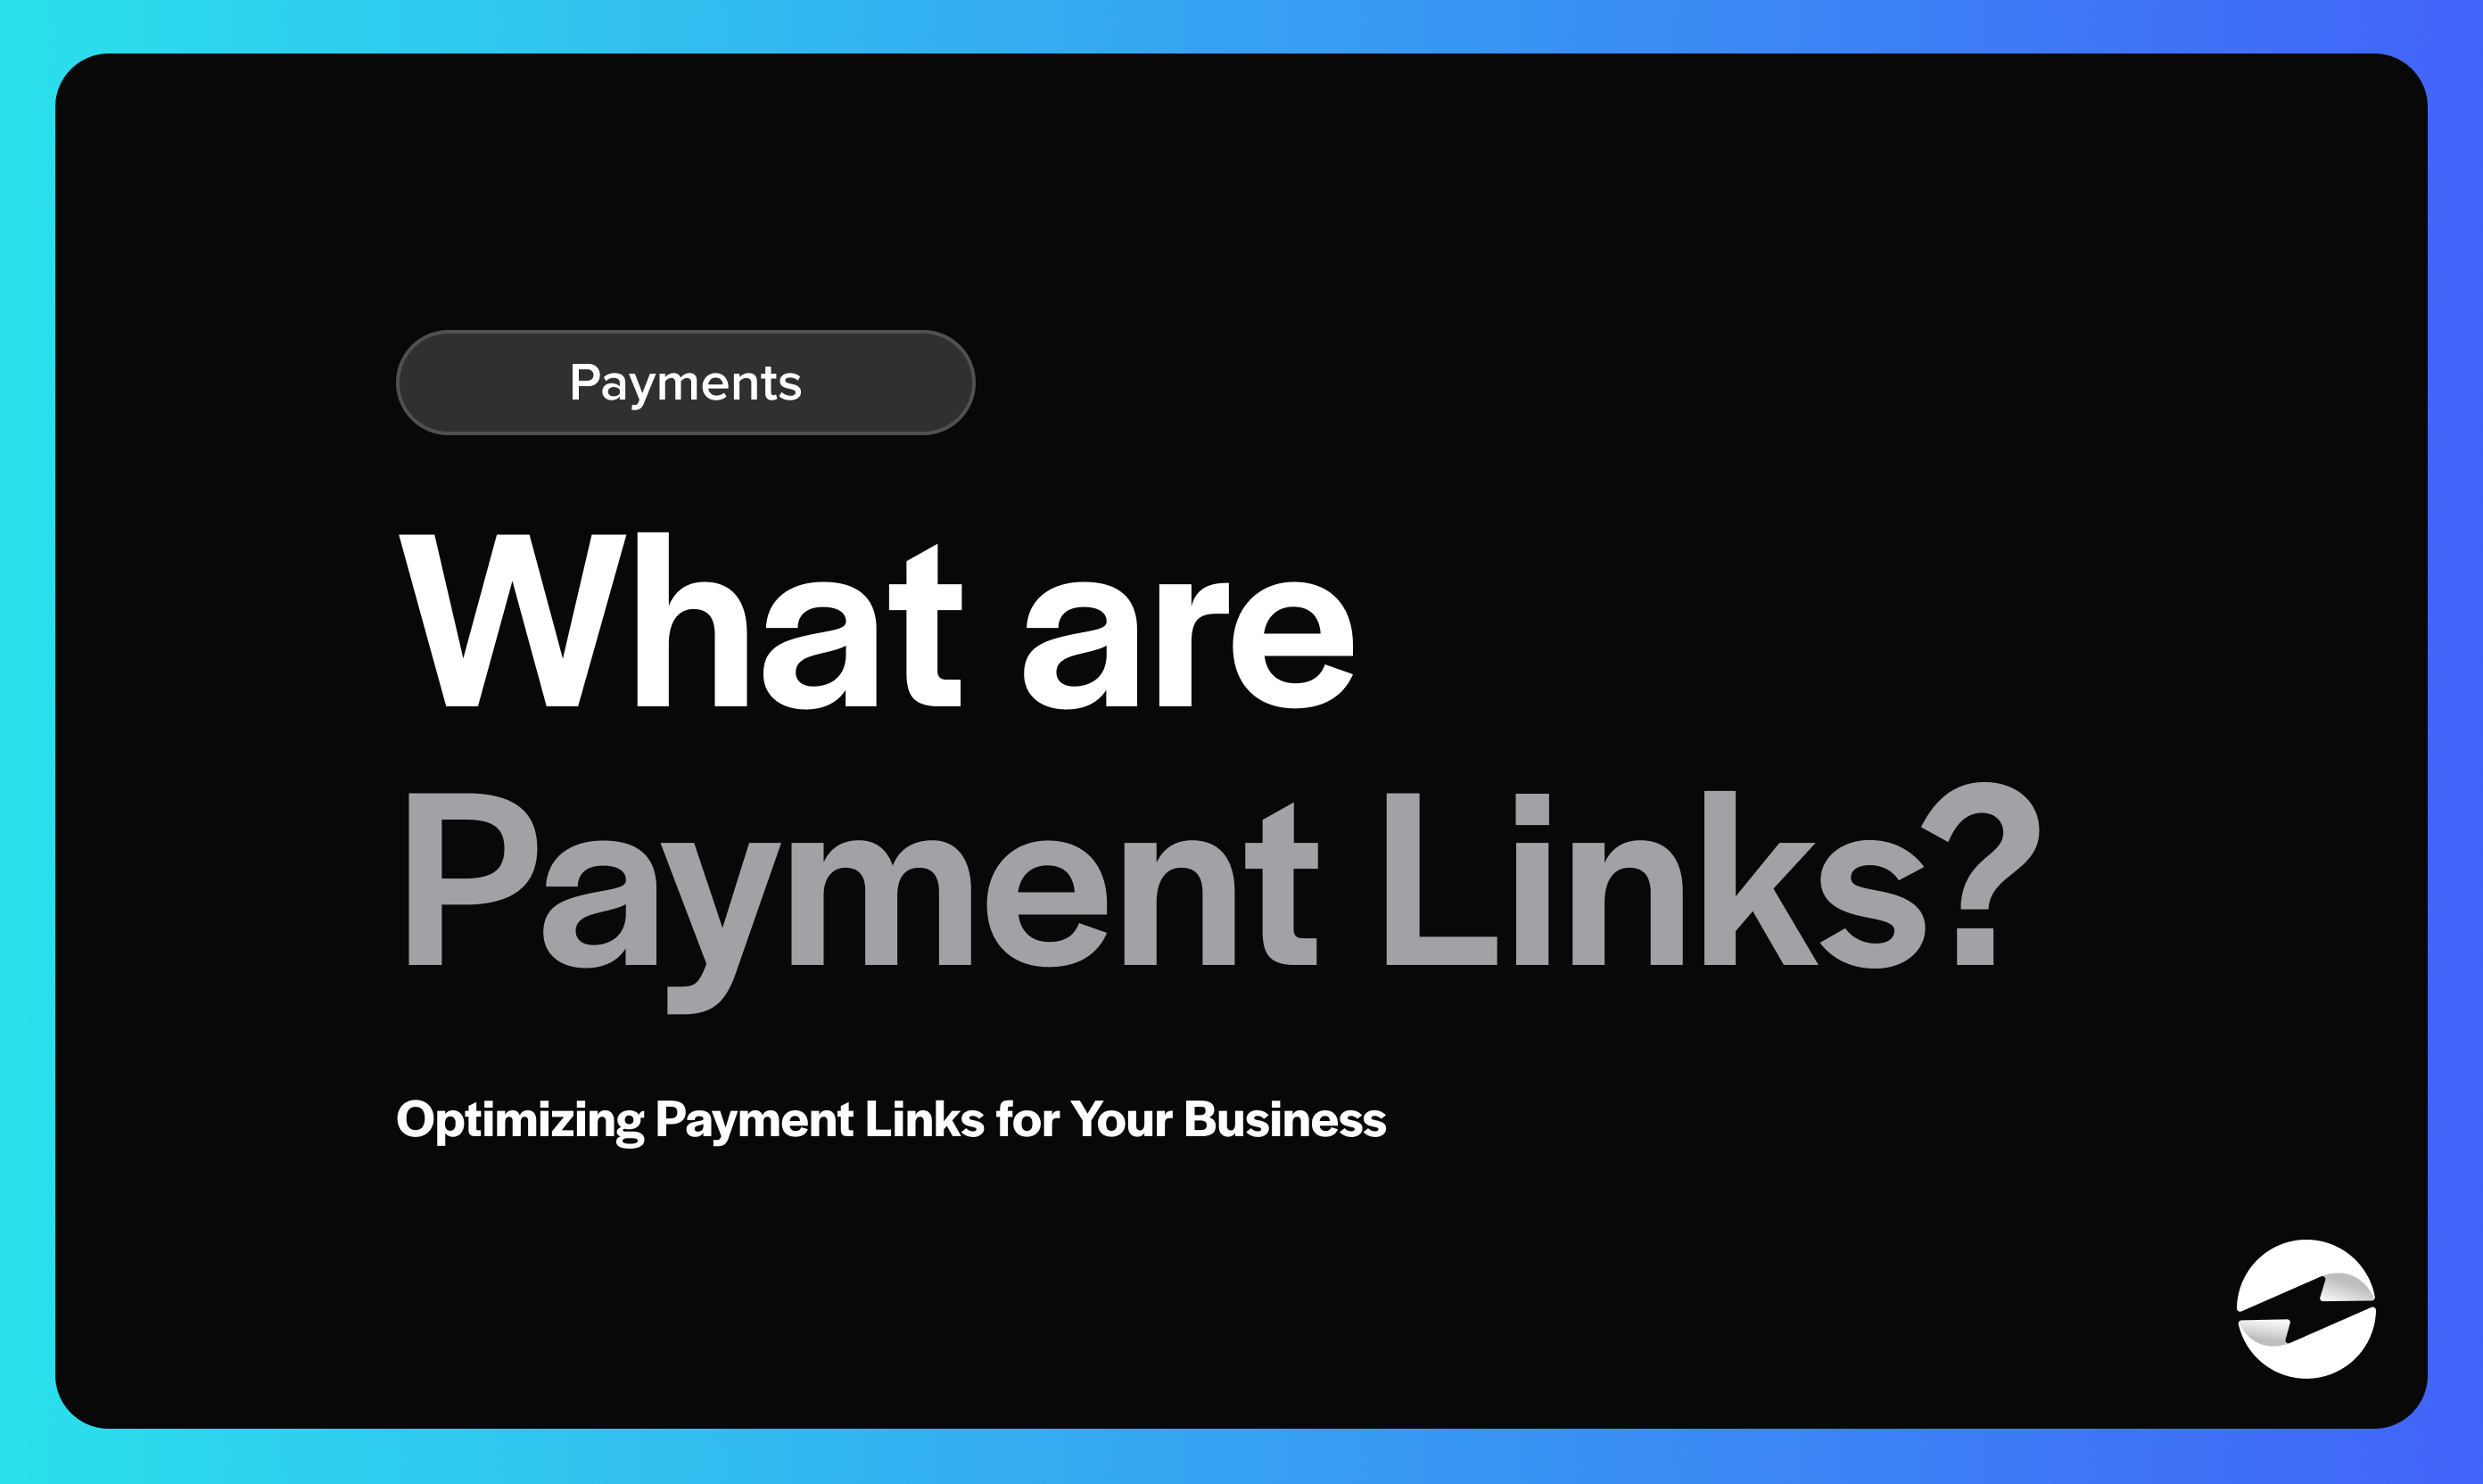 What are Payment Links